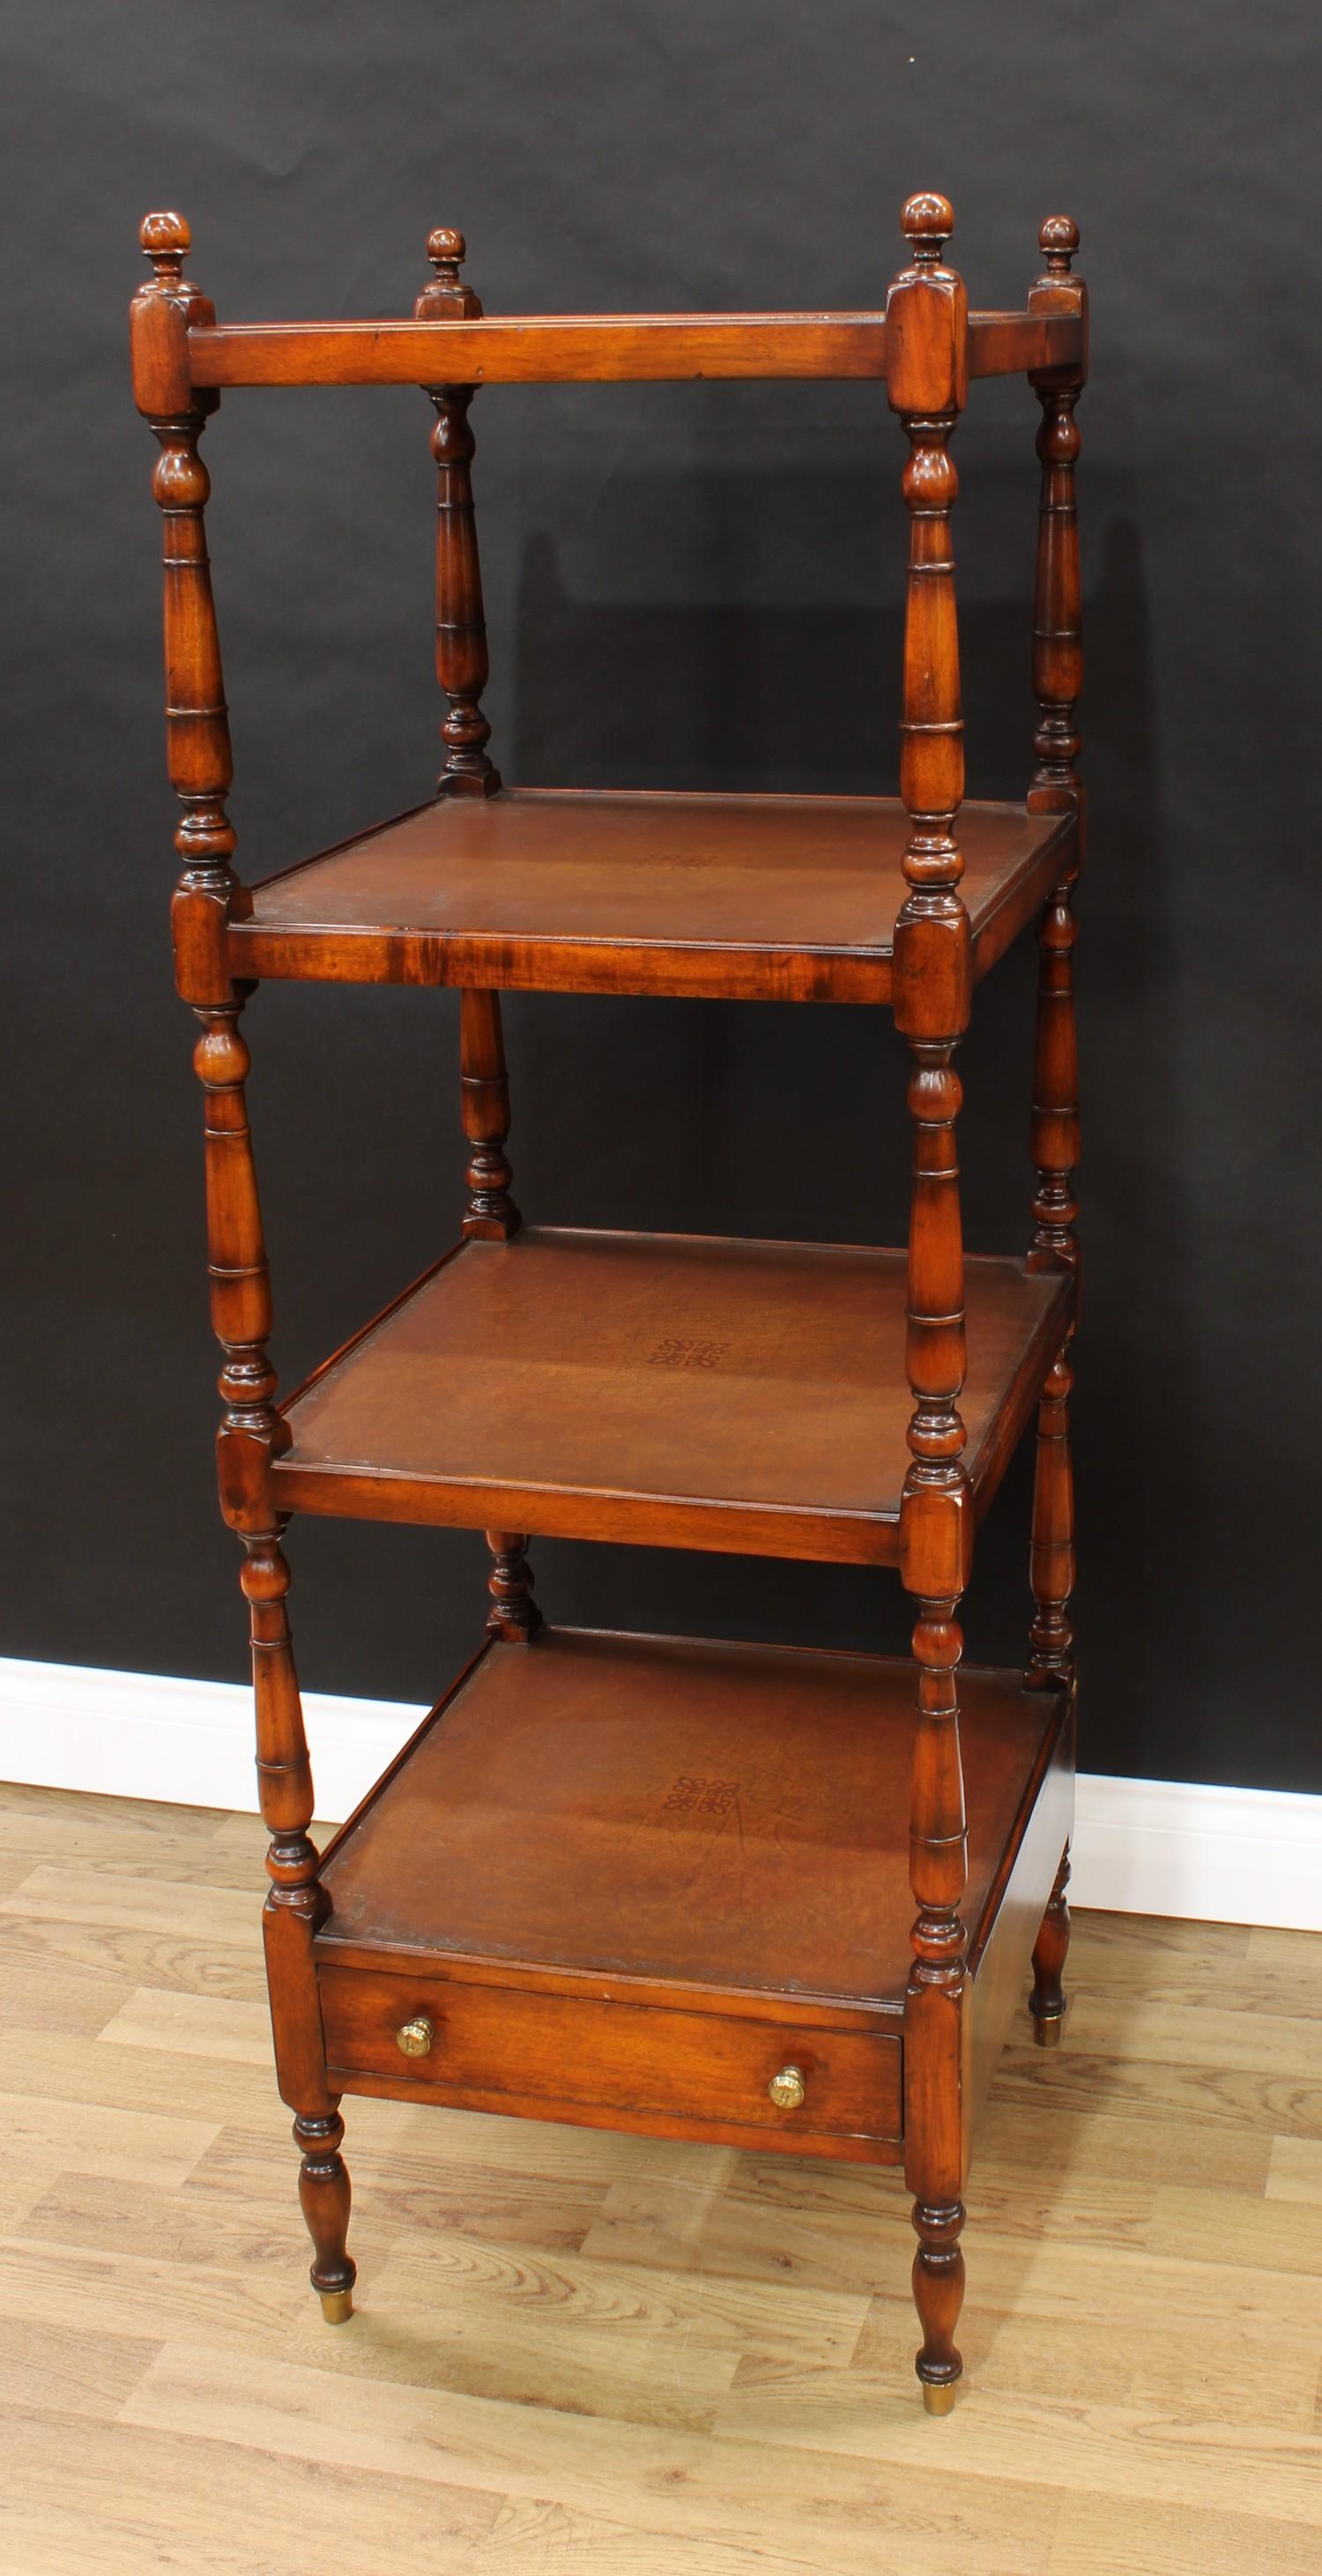 A Regency style mahogany whatnot, each square plateau lined with tan leather, turned finials and